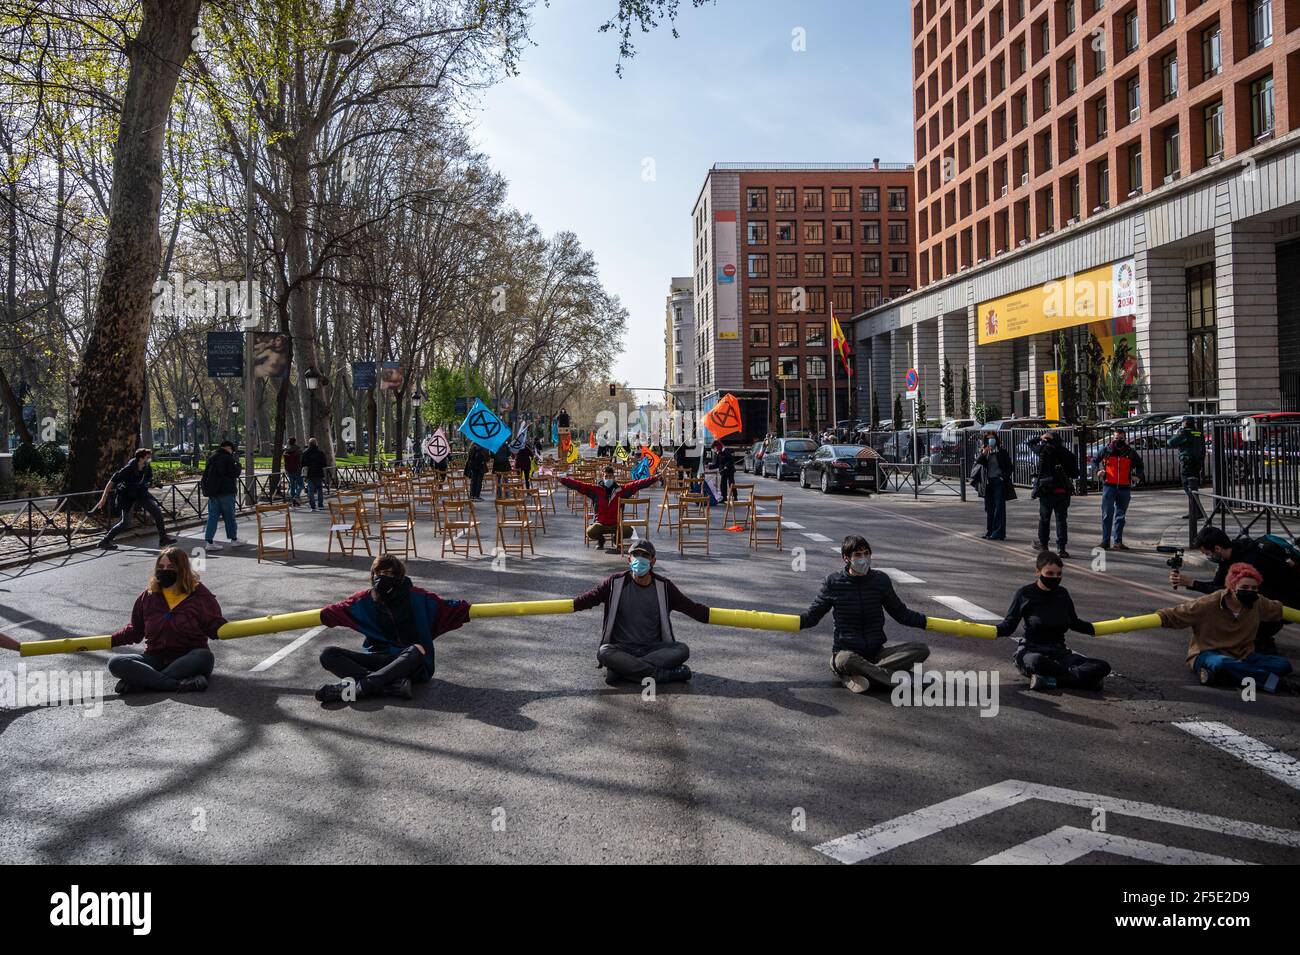 Madrid, Spain. 26th Mar, 2021. Climate change activists of Extinction Rebellion (XR) group chained themselves blocking the street in front of the Health Ministry, during a protest demanding actions against climate change. Credit: Marcos del Mazo/Alamy Live News Stock Photo